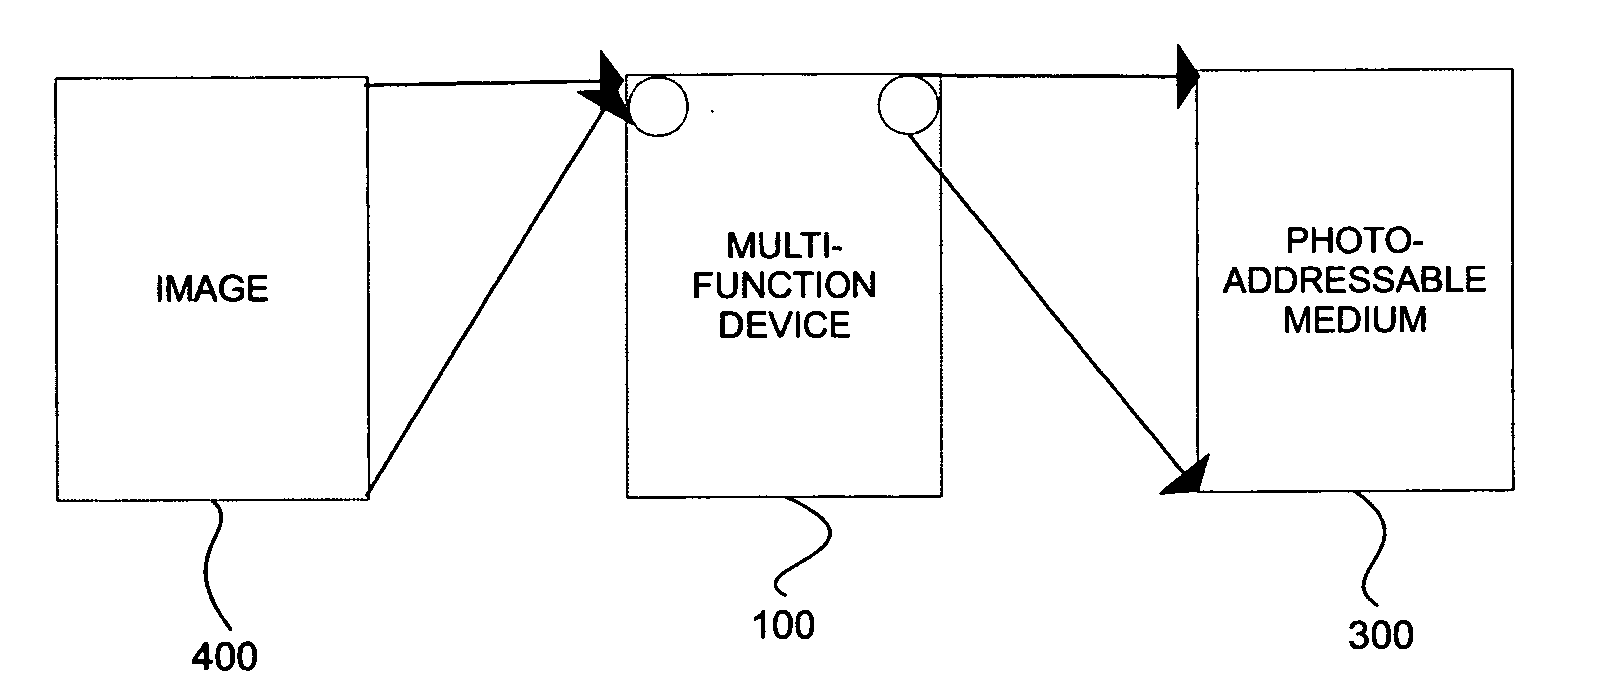 Multi-function image device